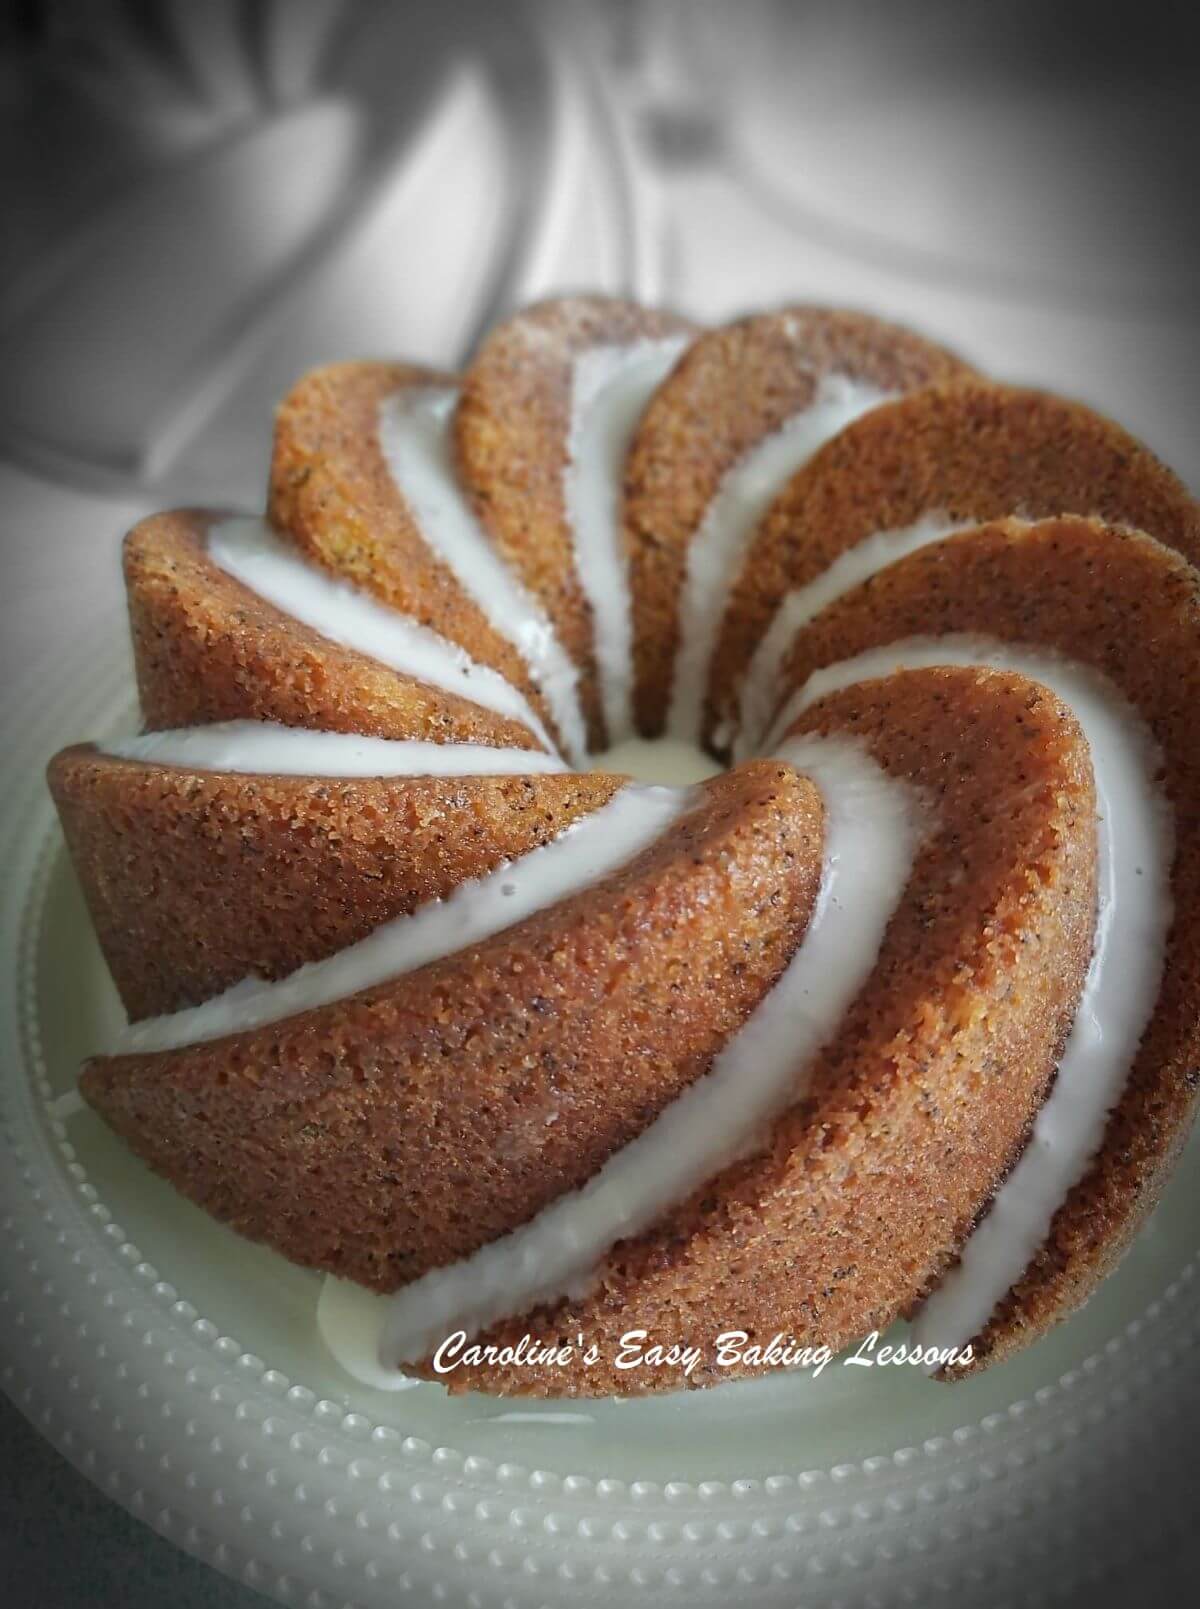 Lemon bundt cake with drizzle down the groves and black and white background.